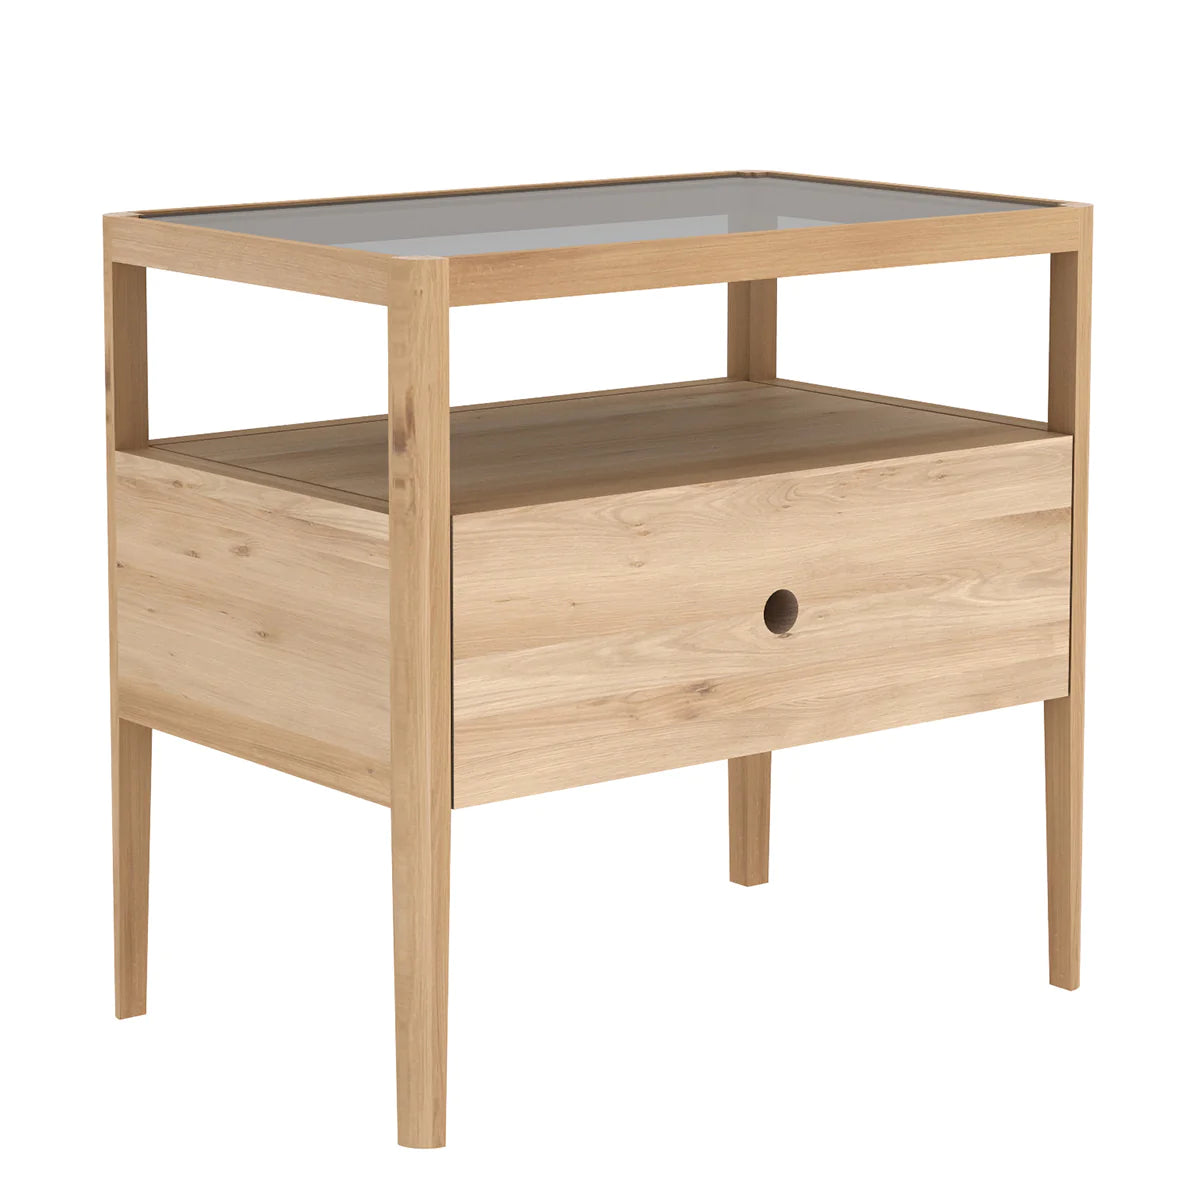 Ethnicraft Oak Spindle Bedside Table is available from Make Your House A Home, Bendigo, Victoria, Australia